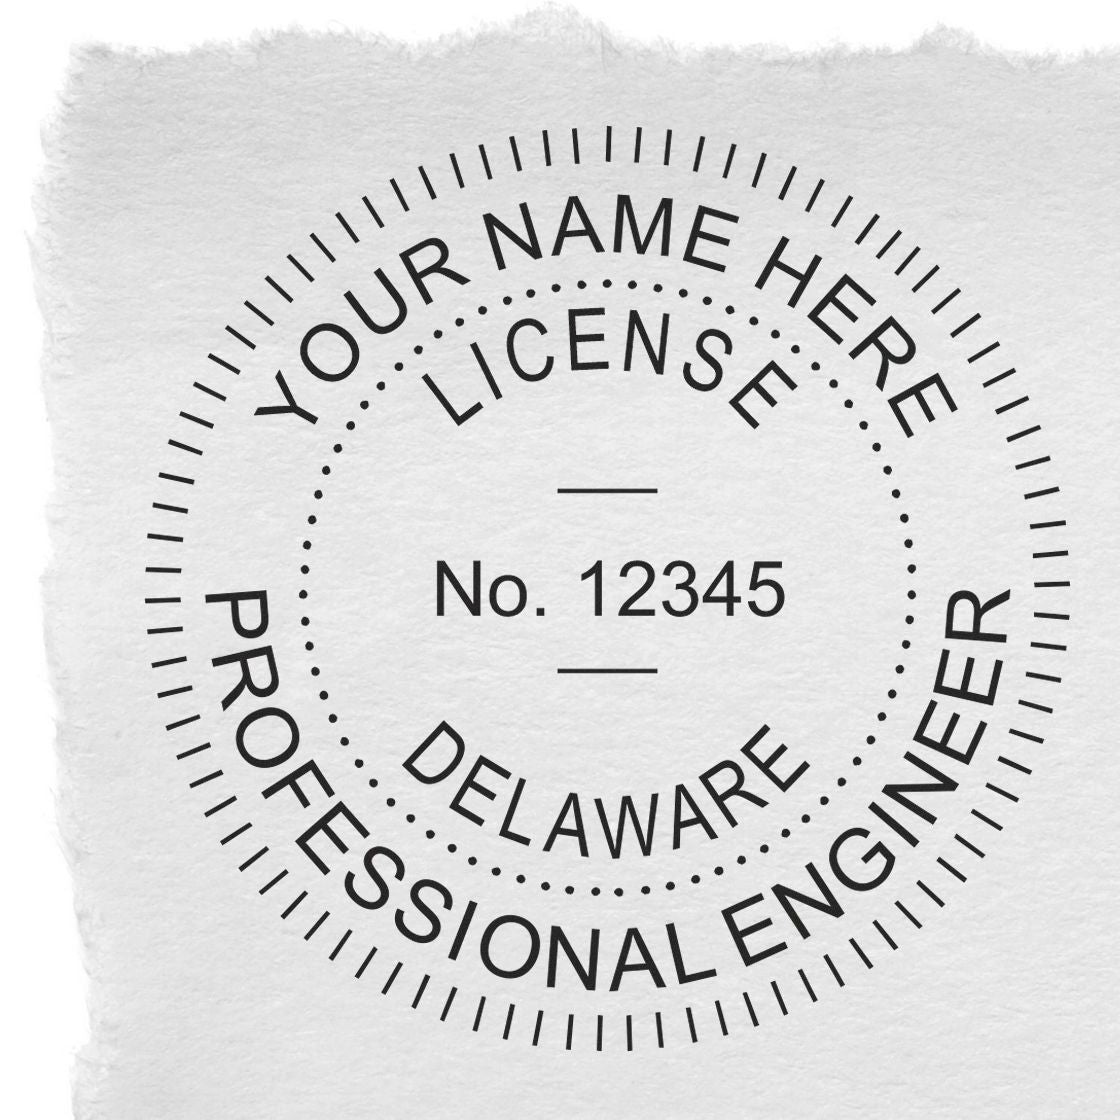 A stamped impression of the Slim Pre-Inked Delaware Professional Engineer Seal Stamp in this stylish lifestyle photo, setting the tone for a unique and personalized product.